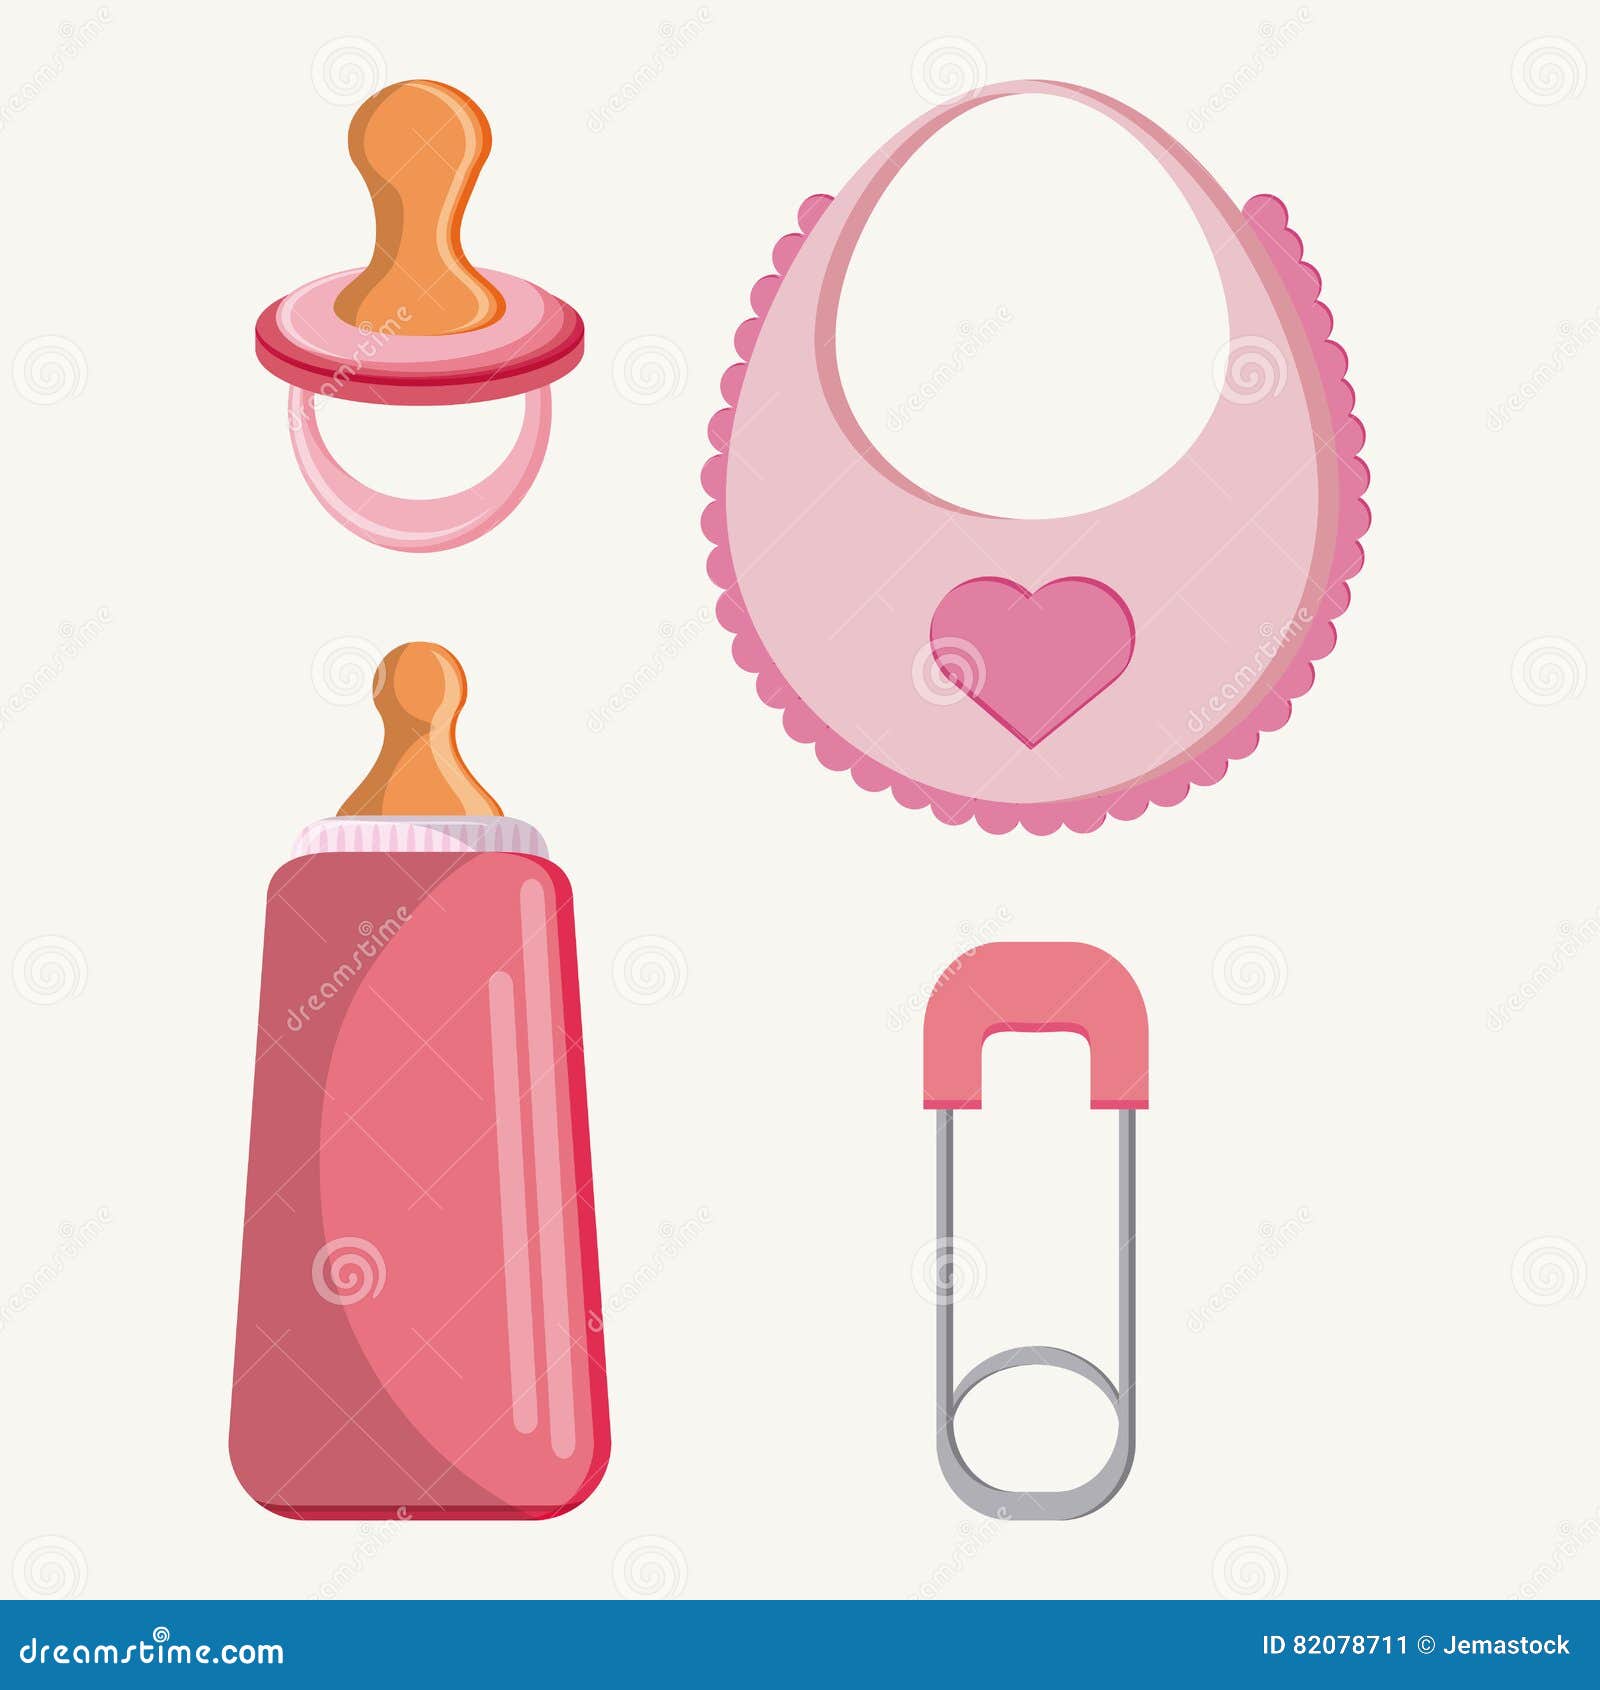 Pacifier Bottle And Baby Bib Design Stock Vector Illustration Of Traditional Postcards